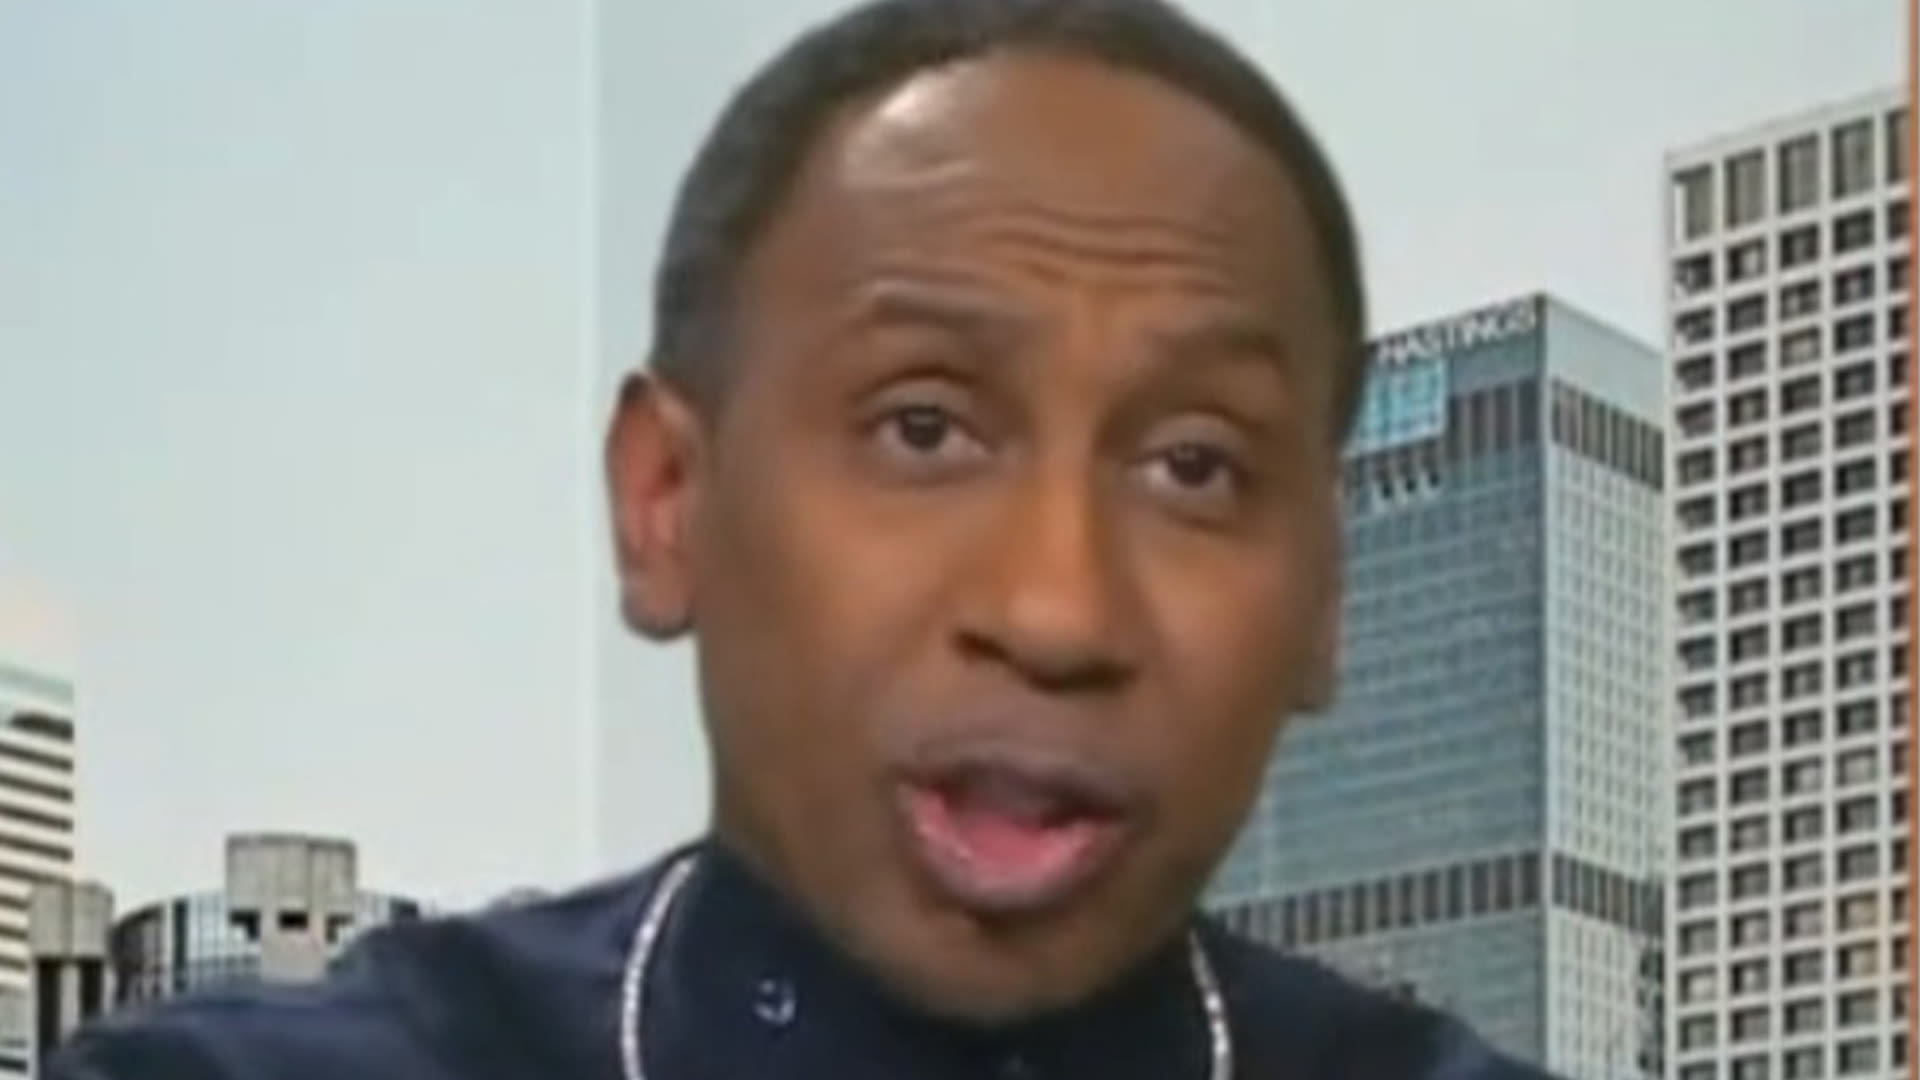 Stephen A. Smith slams NY Knicks star for 'idiotic' play in epic First Take rant